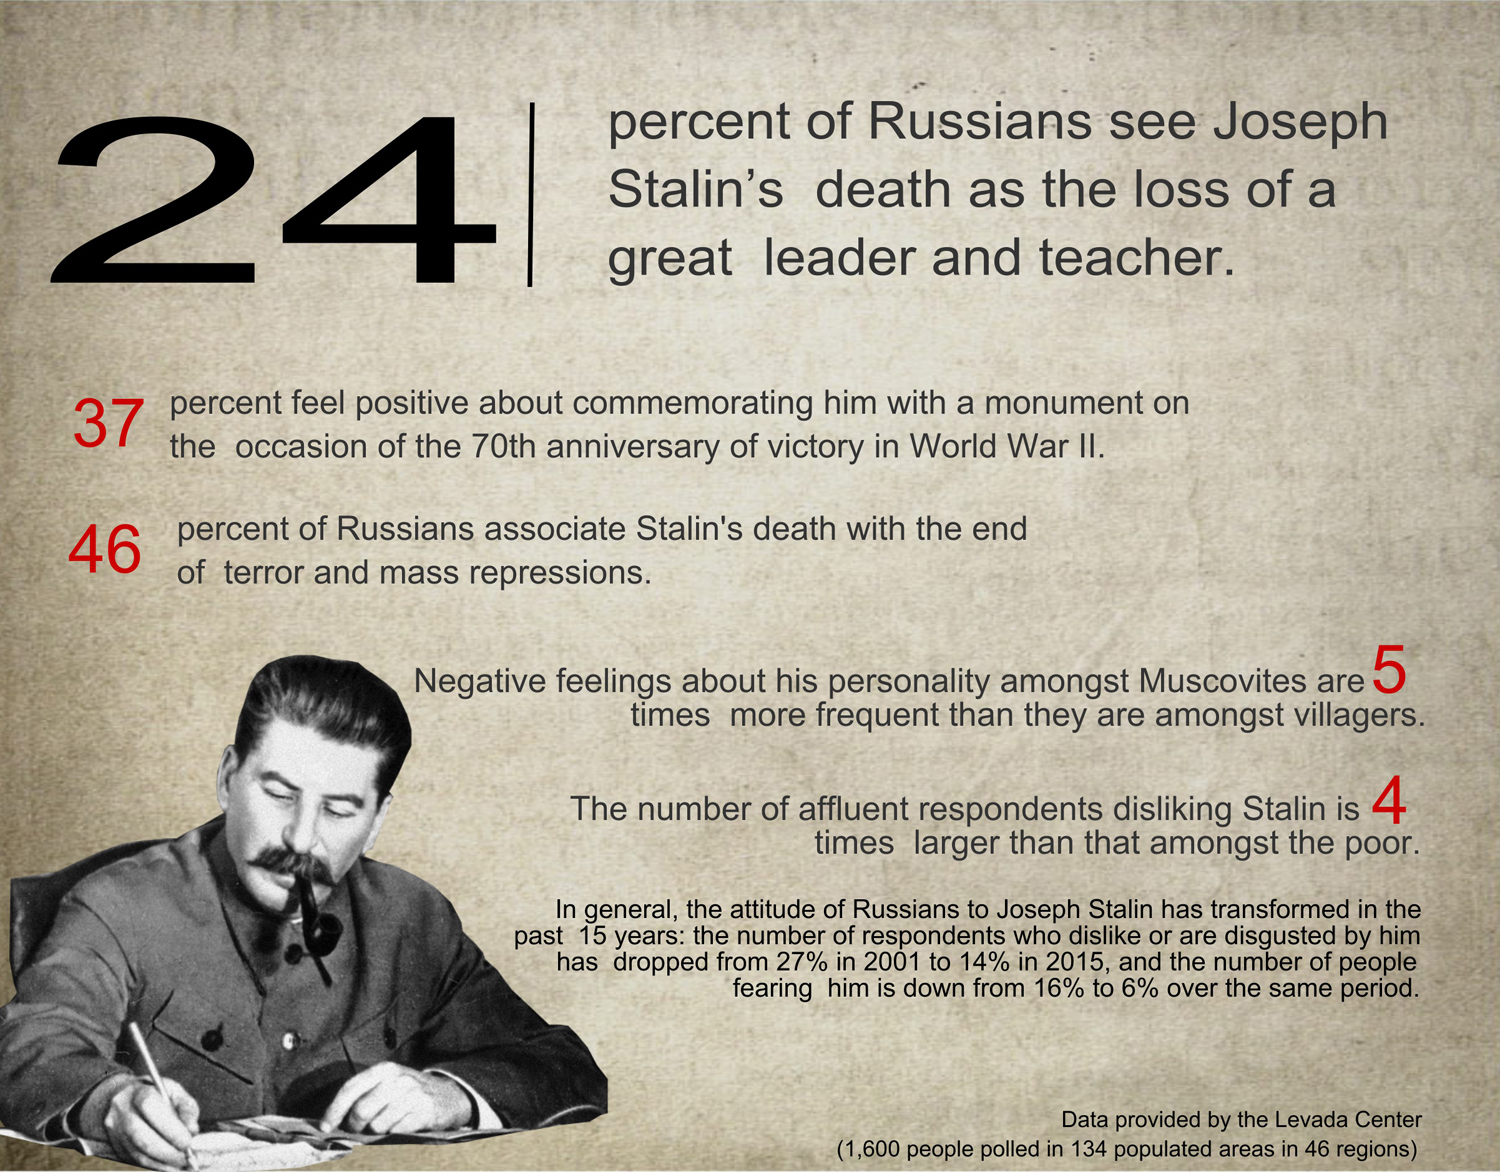 New poll shows each forth Russian sees Stalin’s death as the great loss.